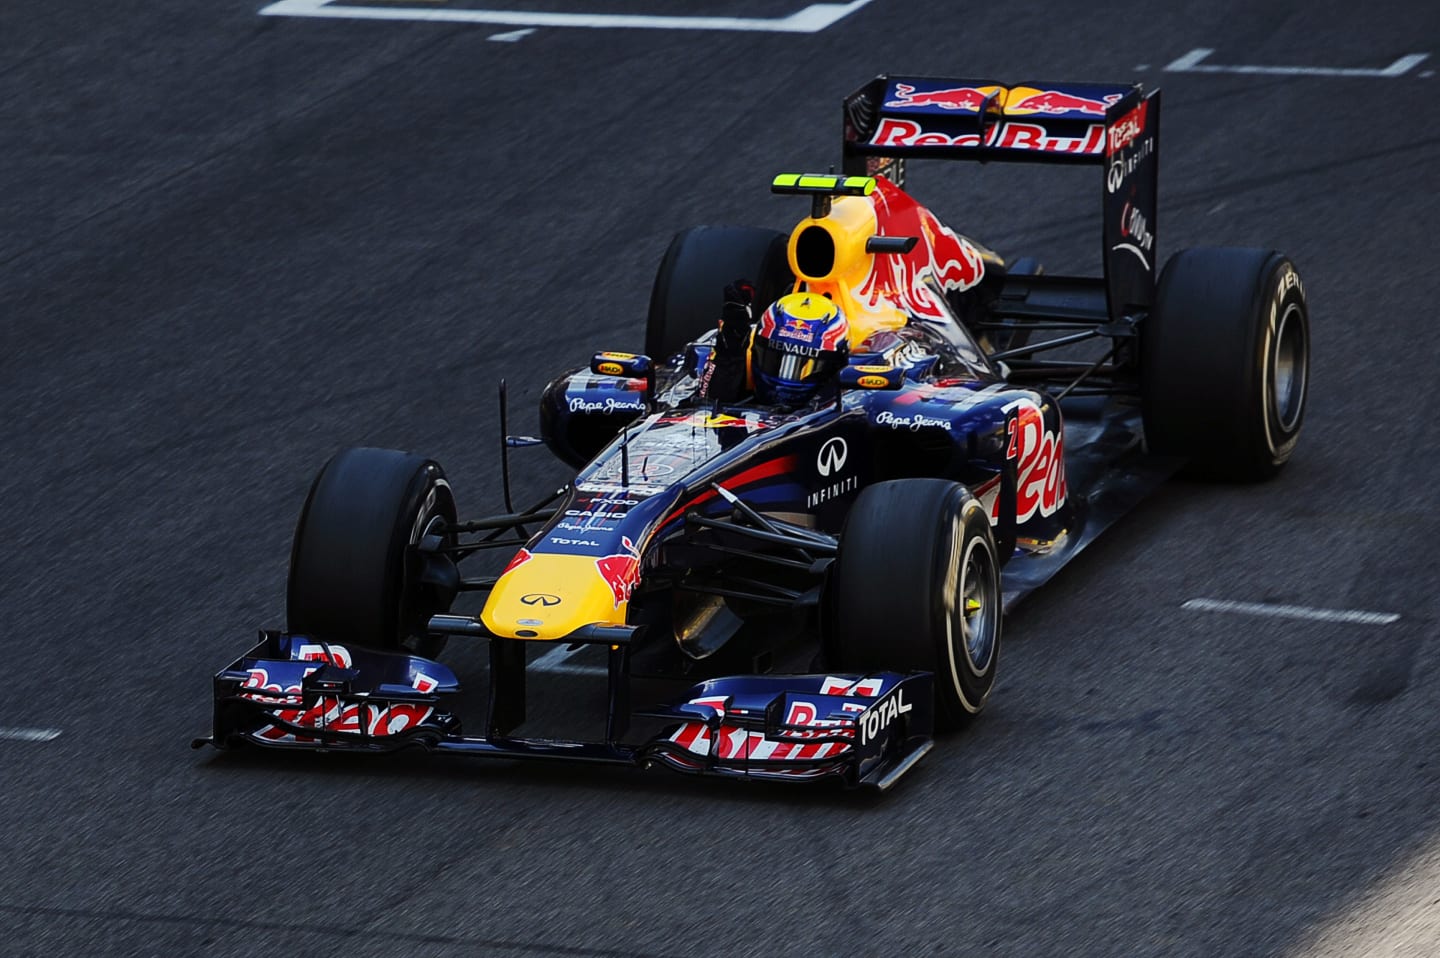 Race winner Mark Webber (AUS) Red Bull Racing RB7 celebrates at the end of the race.
Formula One